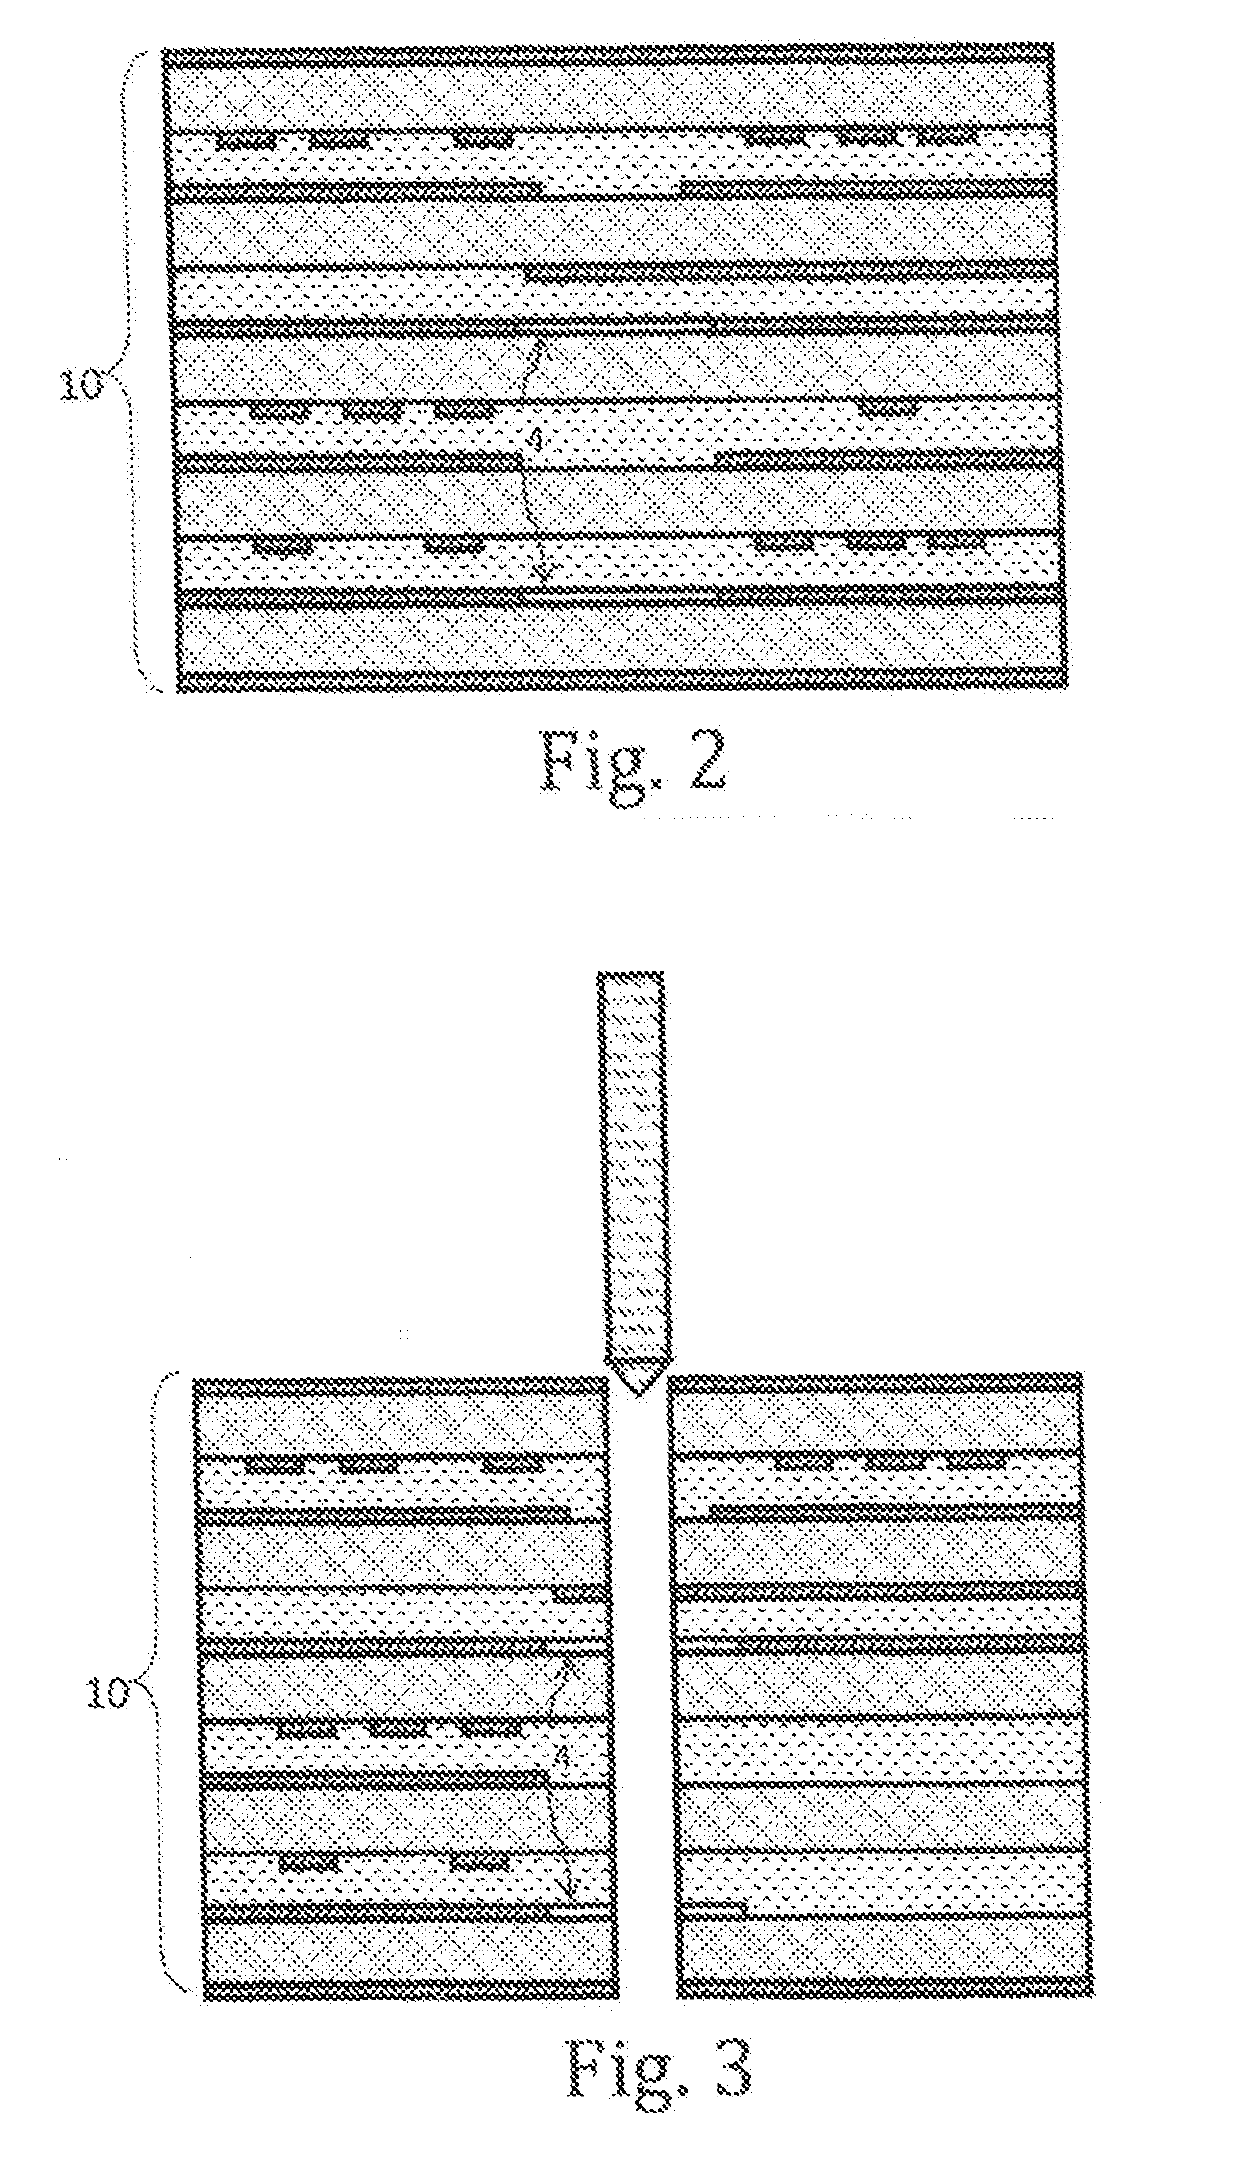 Single lamination blind and method for forming the same